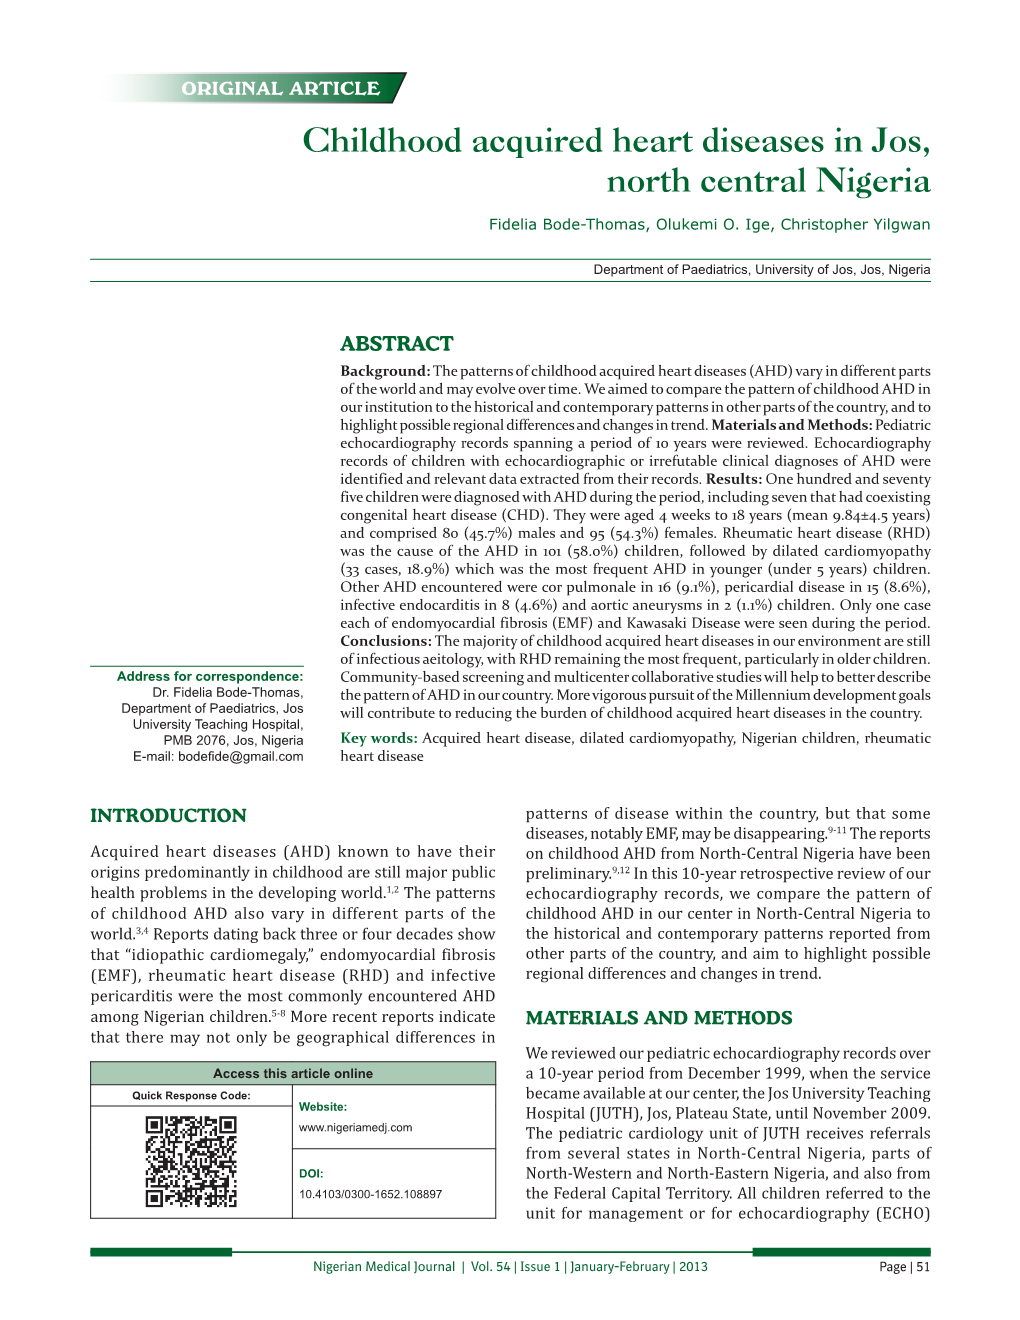 Childhood Acquired Heart Diseases in Jos, North Central Nigeria